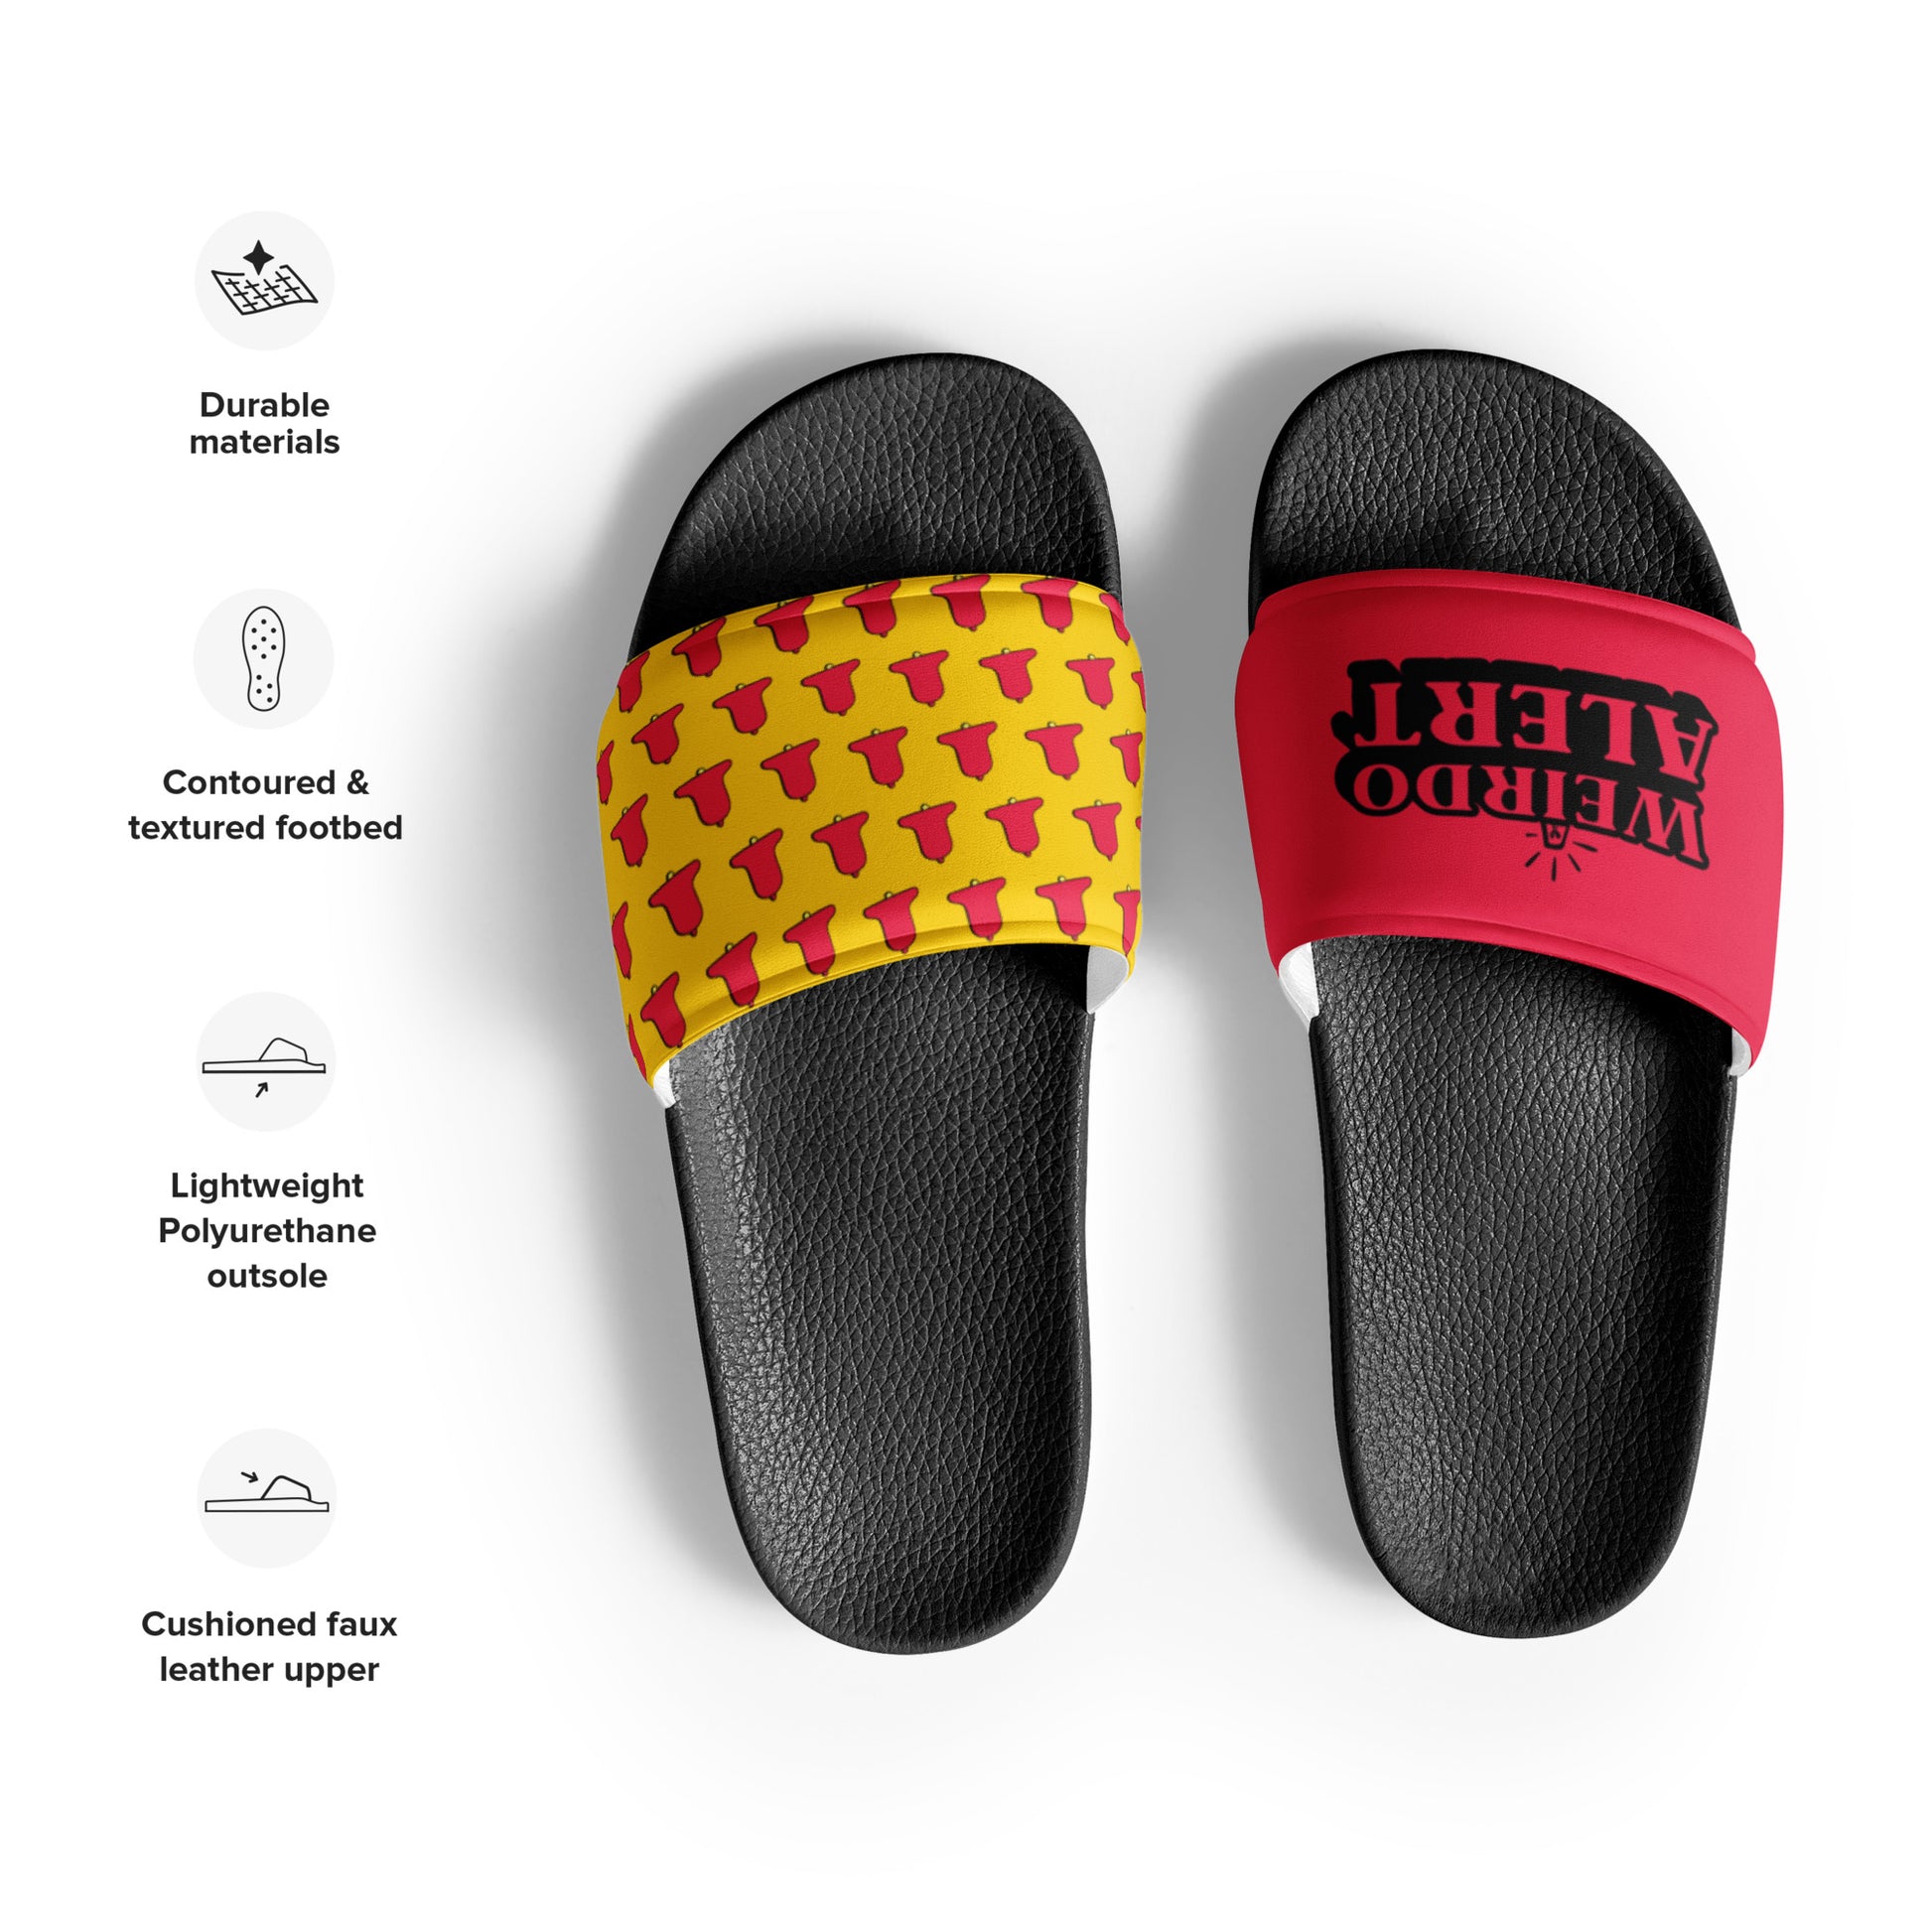 #WEIRDO | Slides for men and women who are weird! Warn the people around you! Check out more weird stuff in our online giftstore!